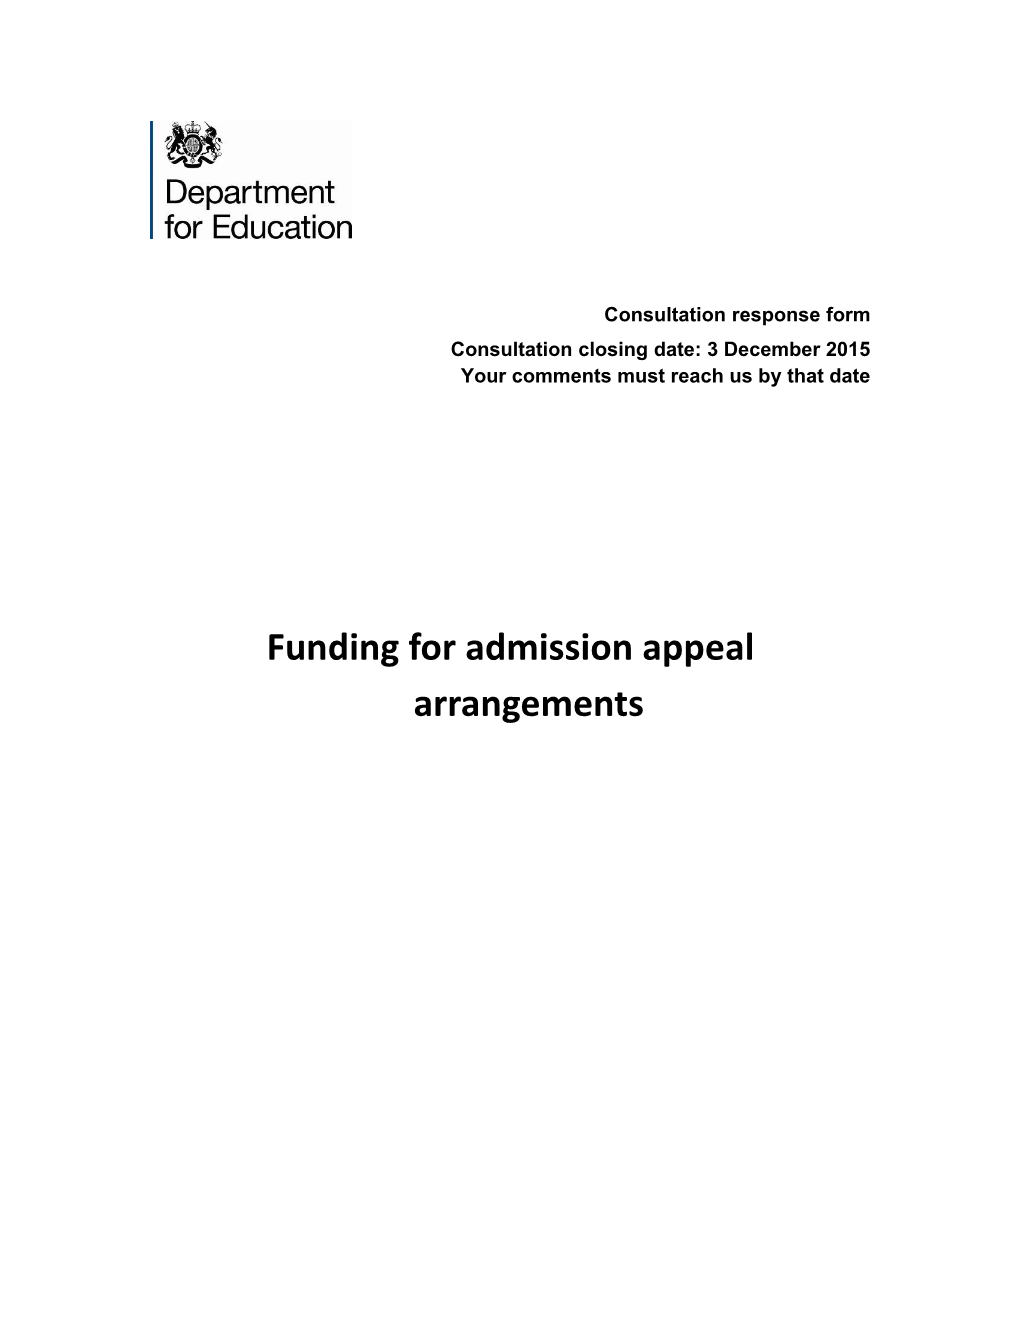 Funding for Admission Appeal Arrangements